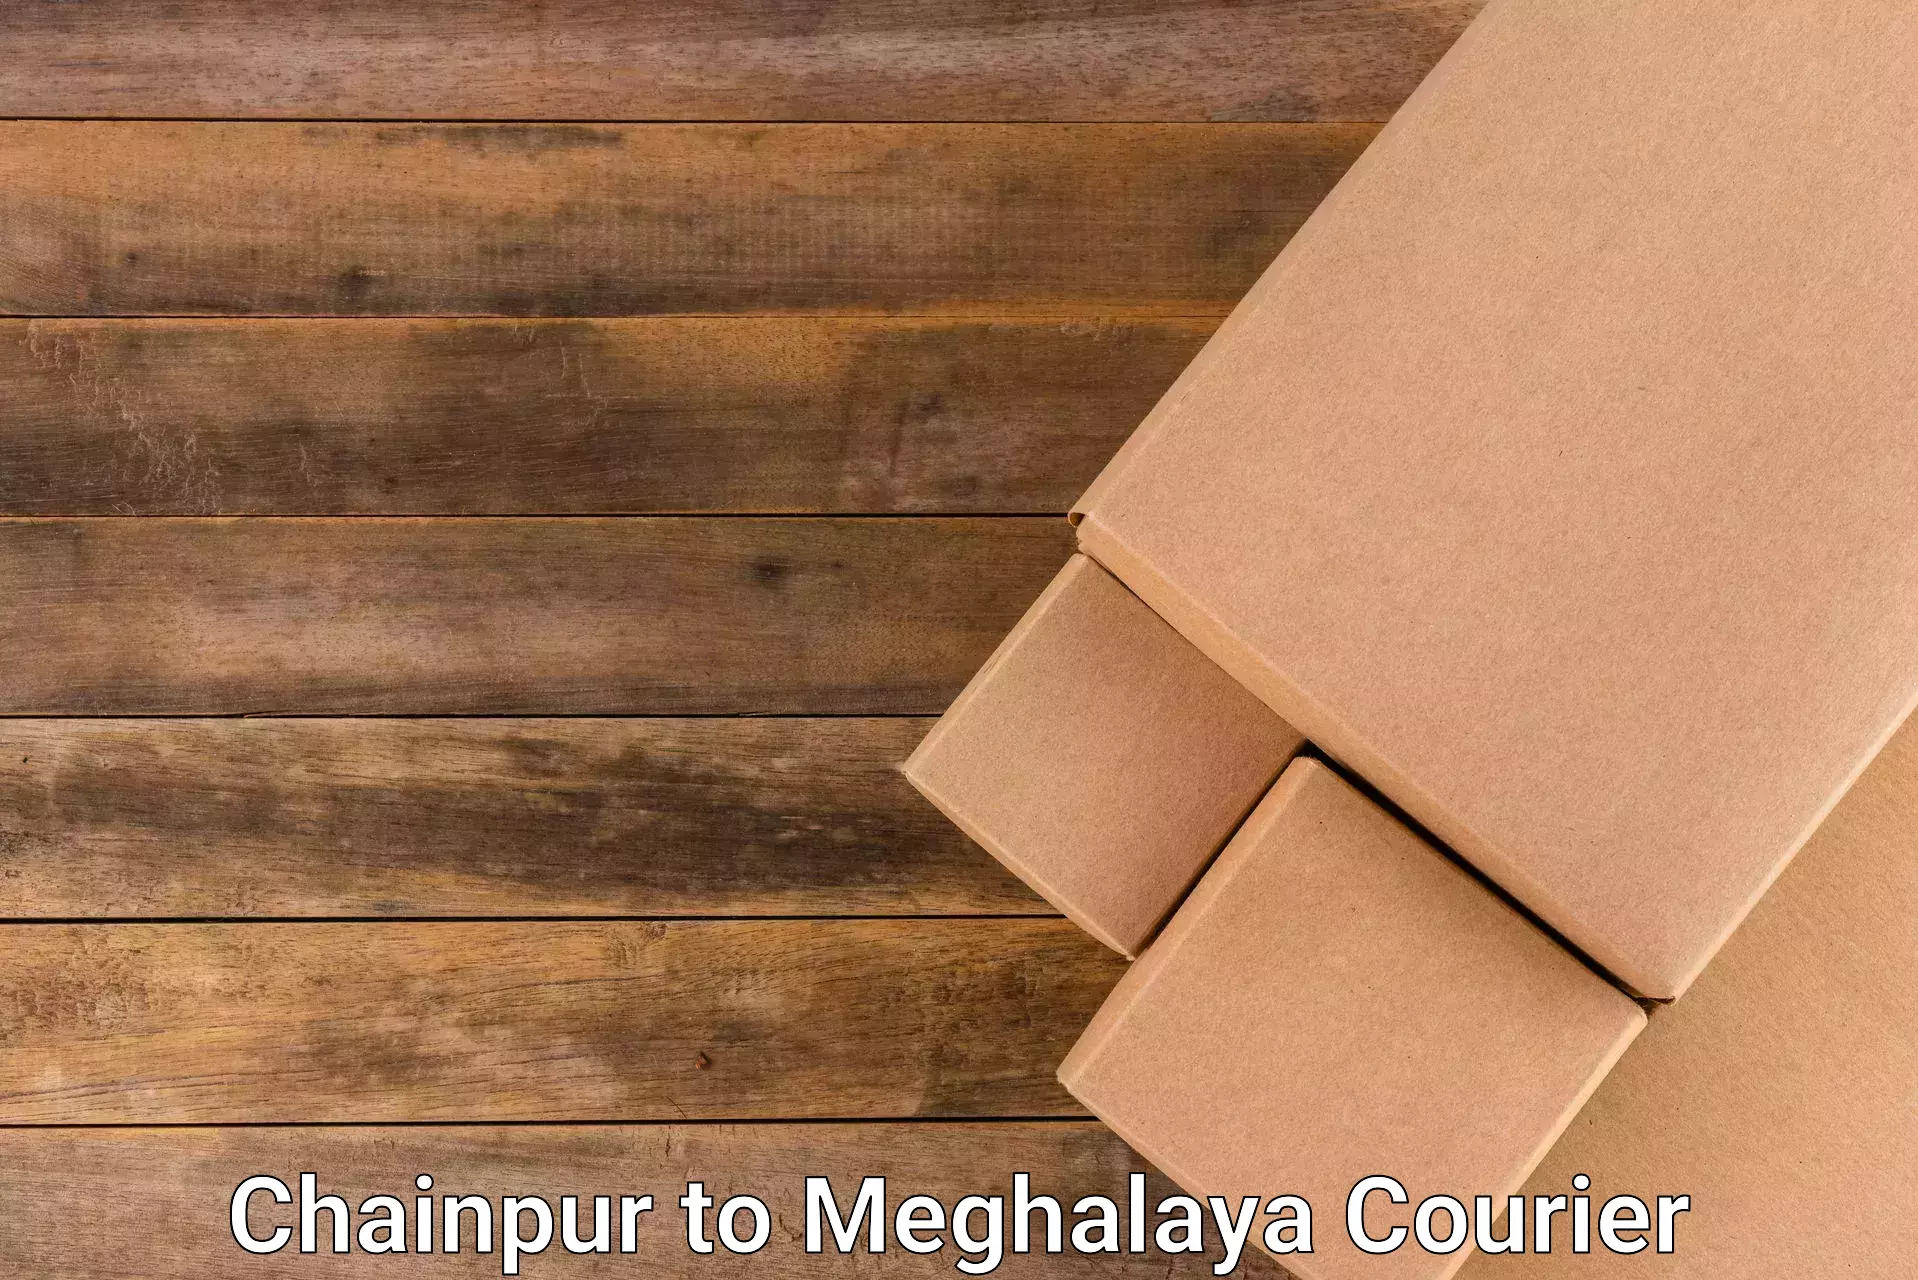 24-hour delivery options Chainpur to Meghalaya